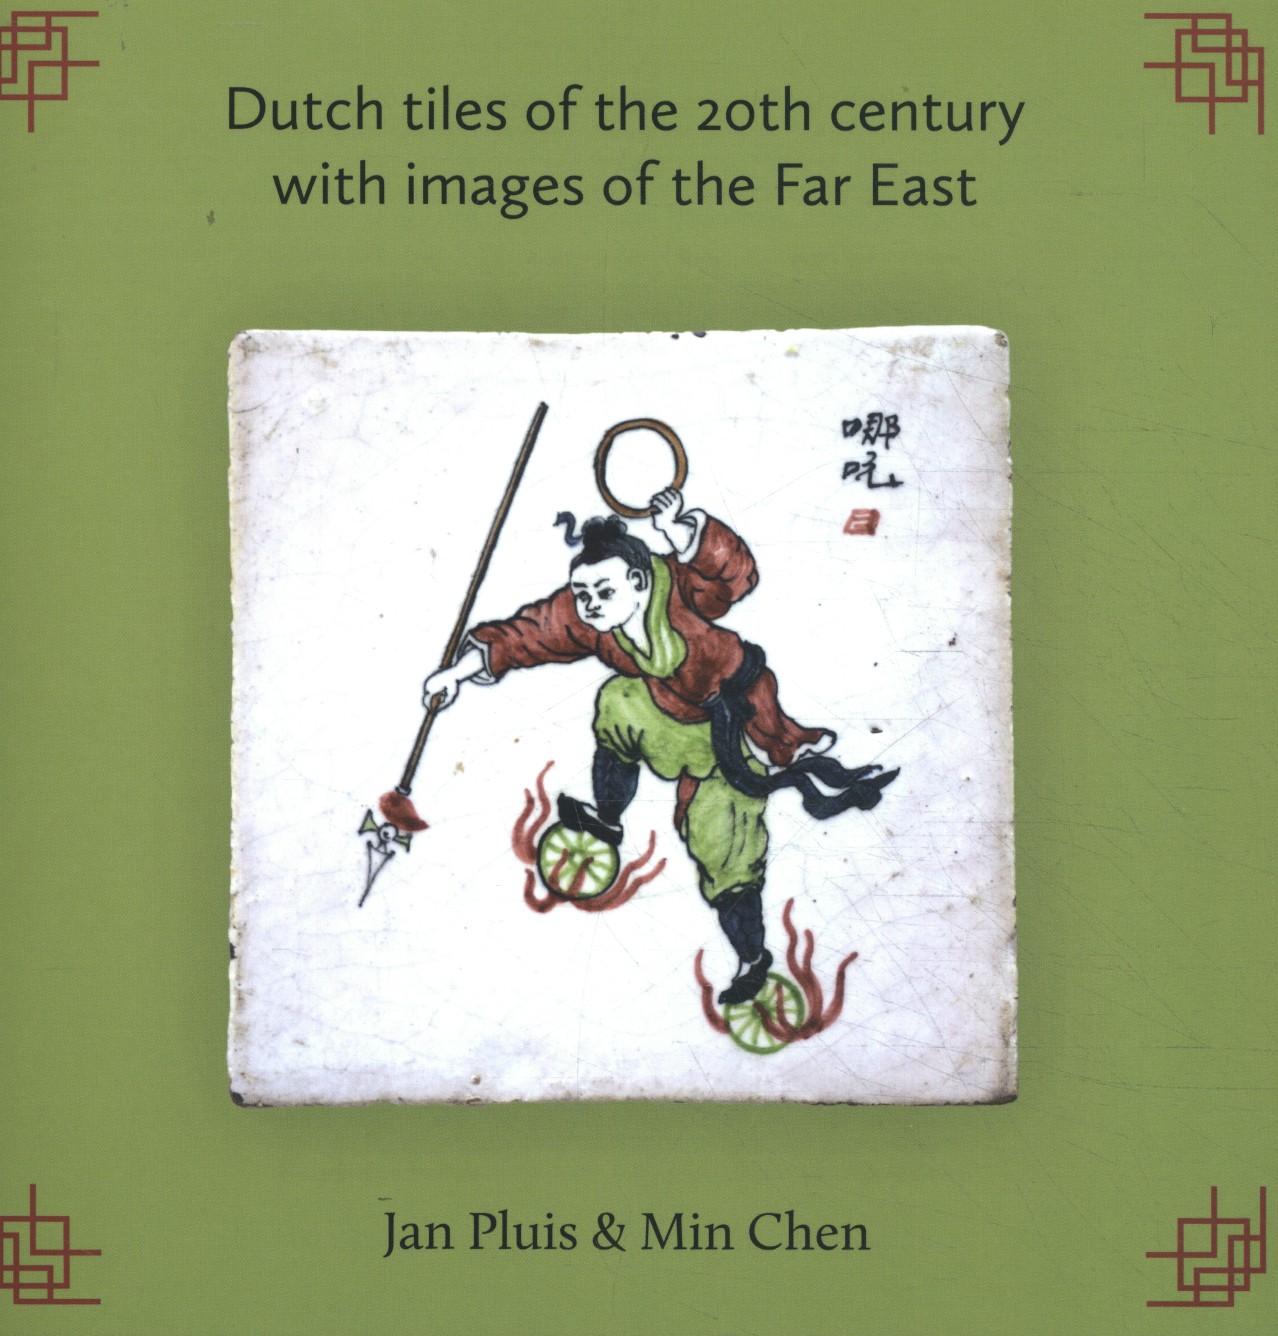 Dutch tiles of the 20th century with images of the Far East